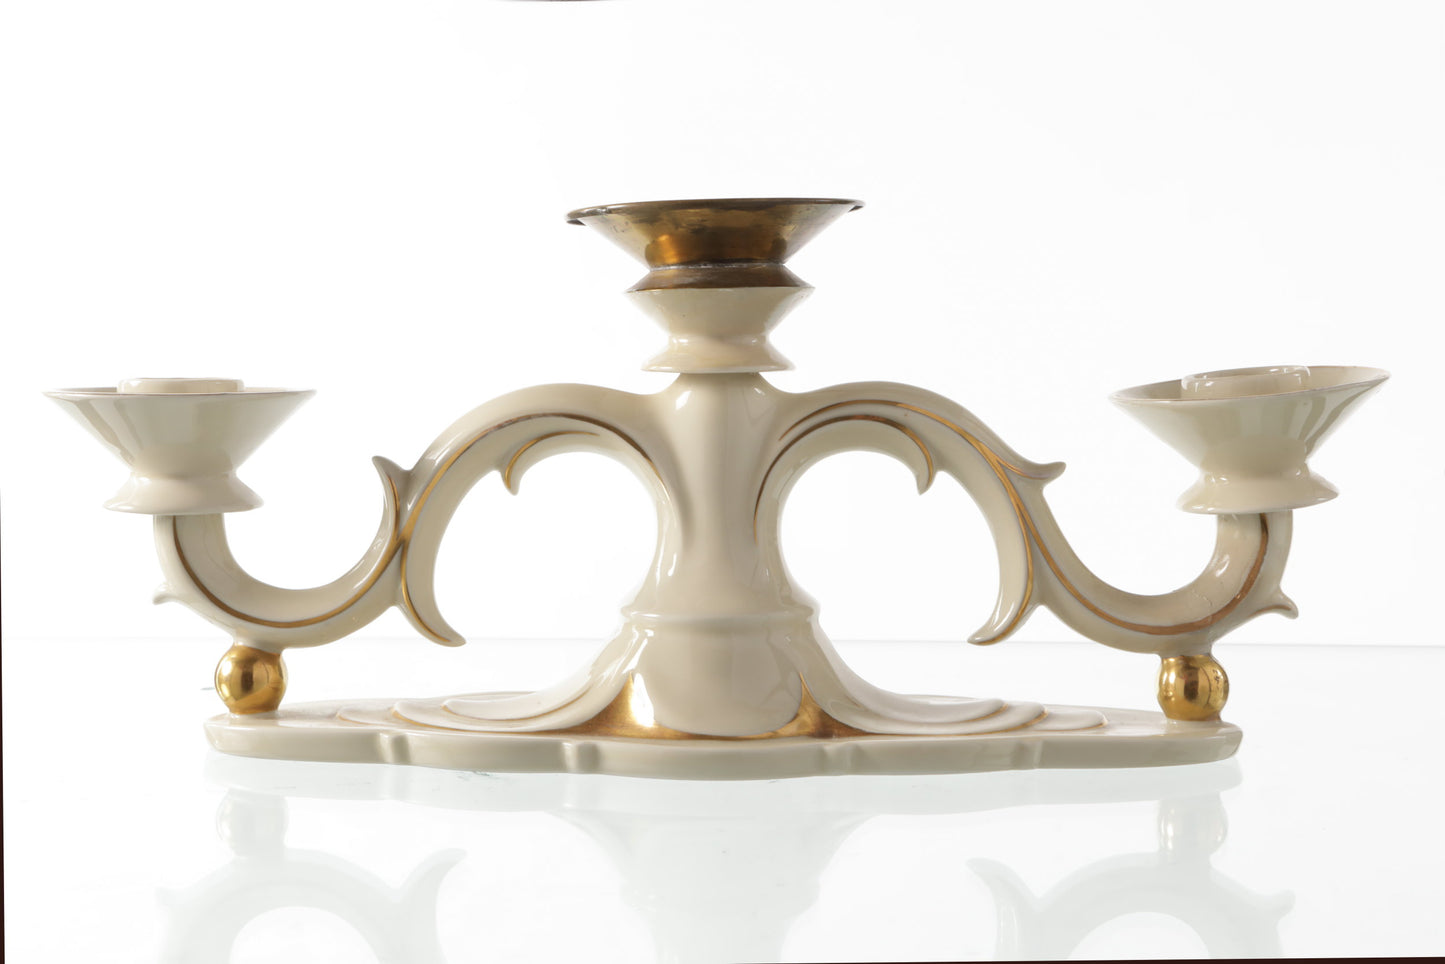 Small ivory and gold porcelain candlestick from the 1950s